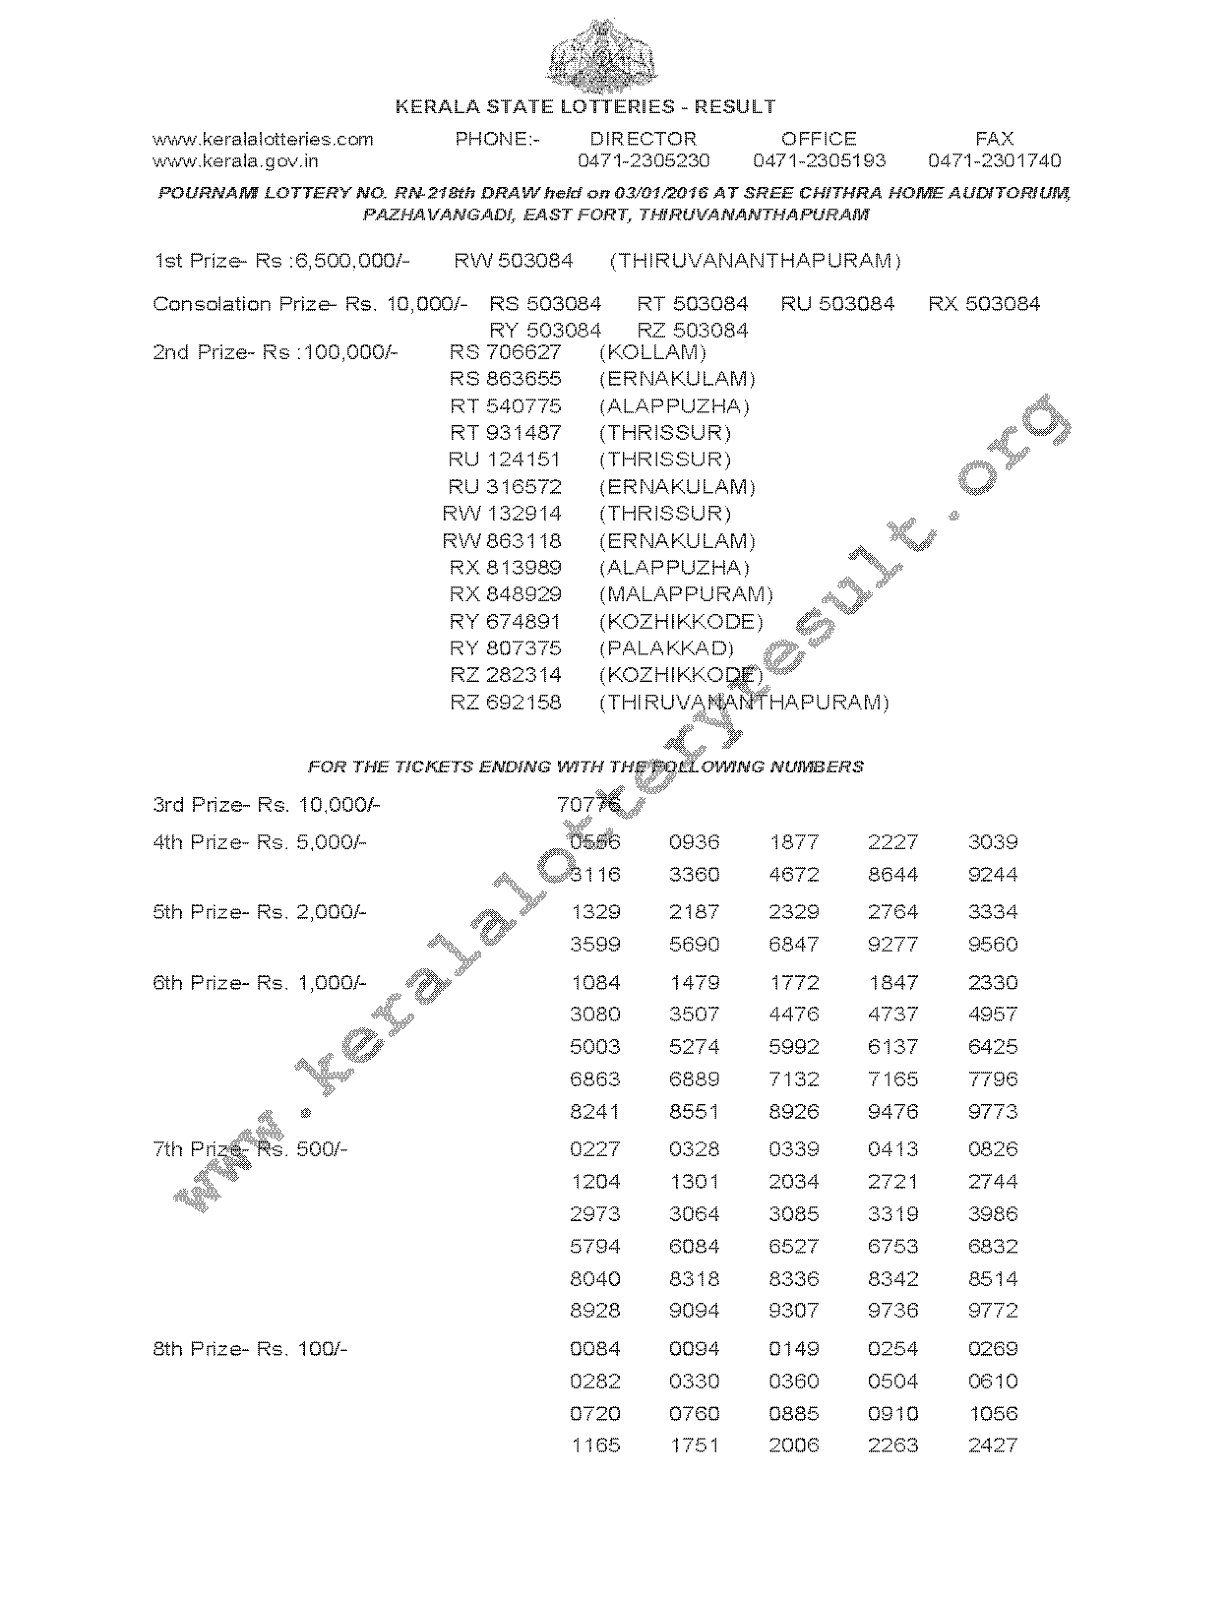 POURNAMI Lottery RN 218 Result 3-1-2016